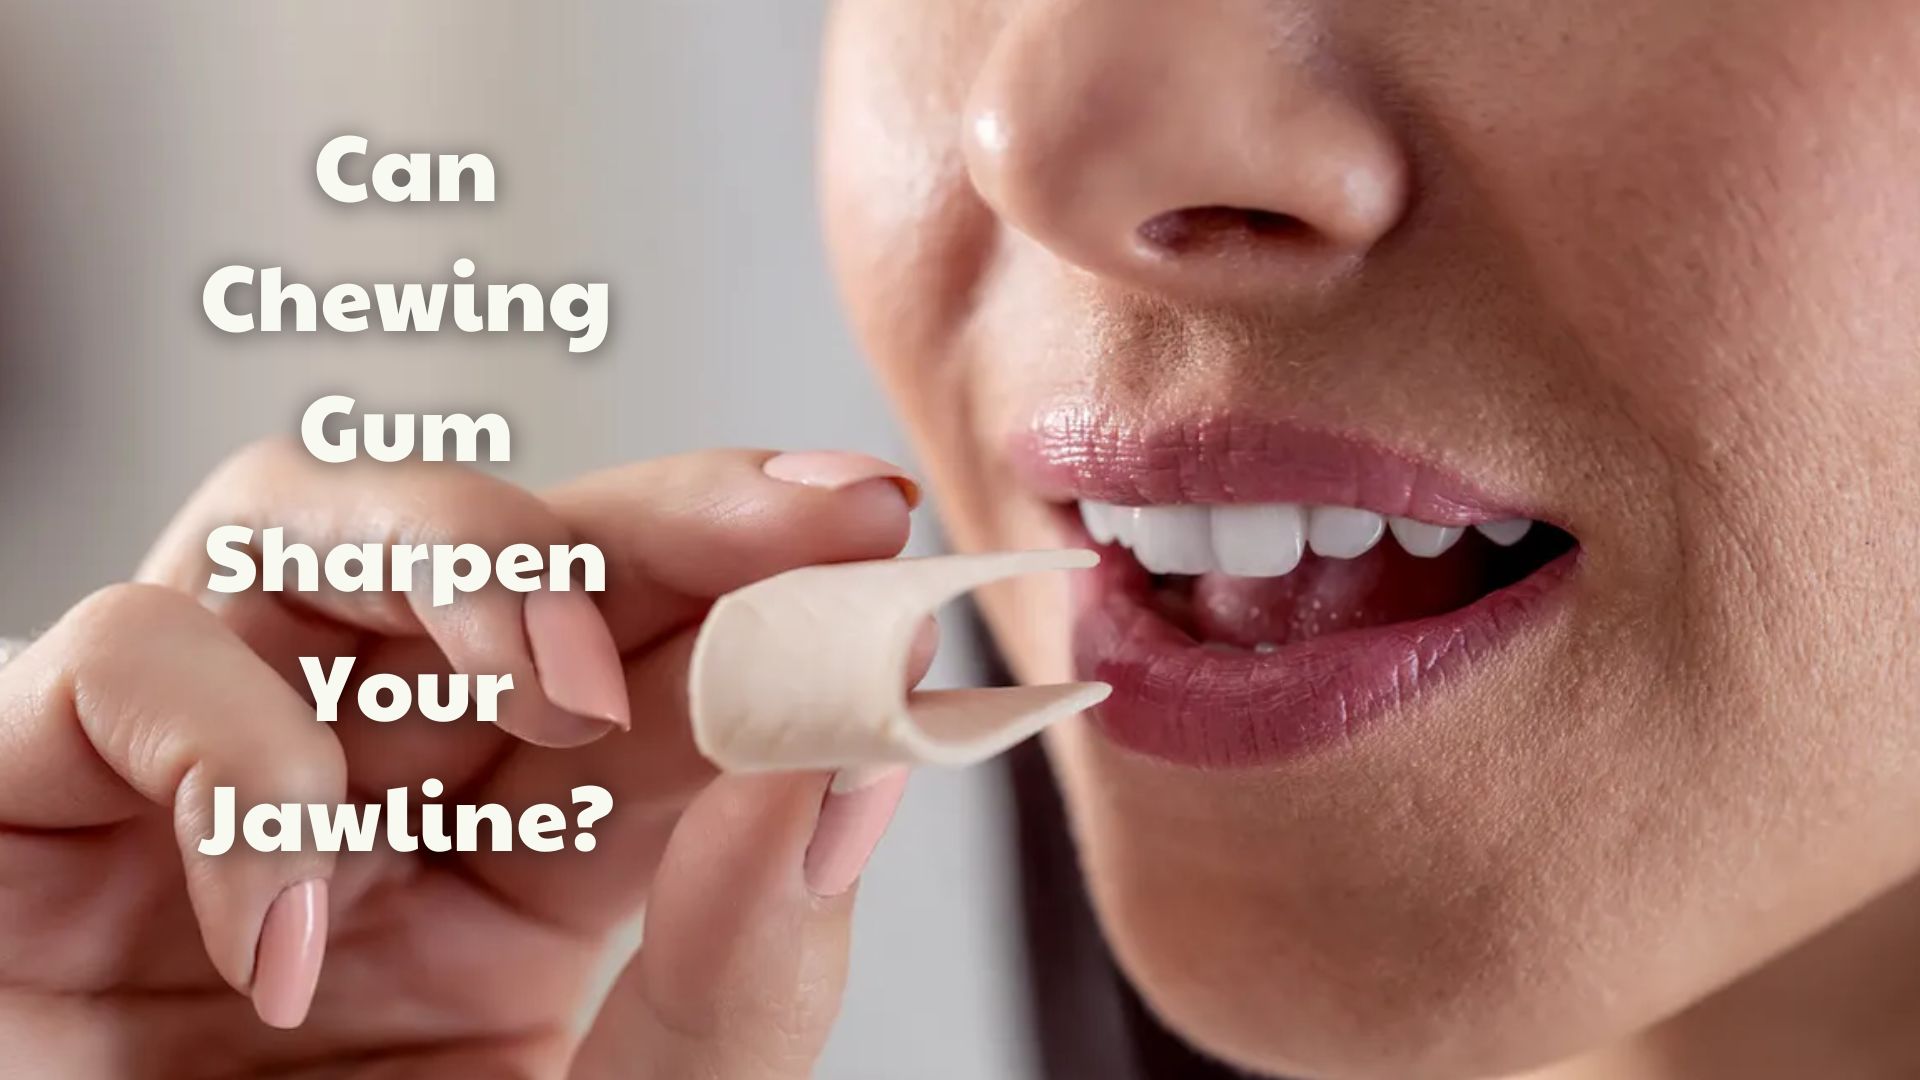 Can Chewing Gum Sharpen Your Jawline? Truth Or Rumor?